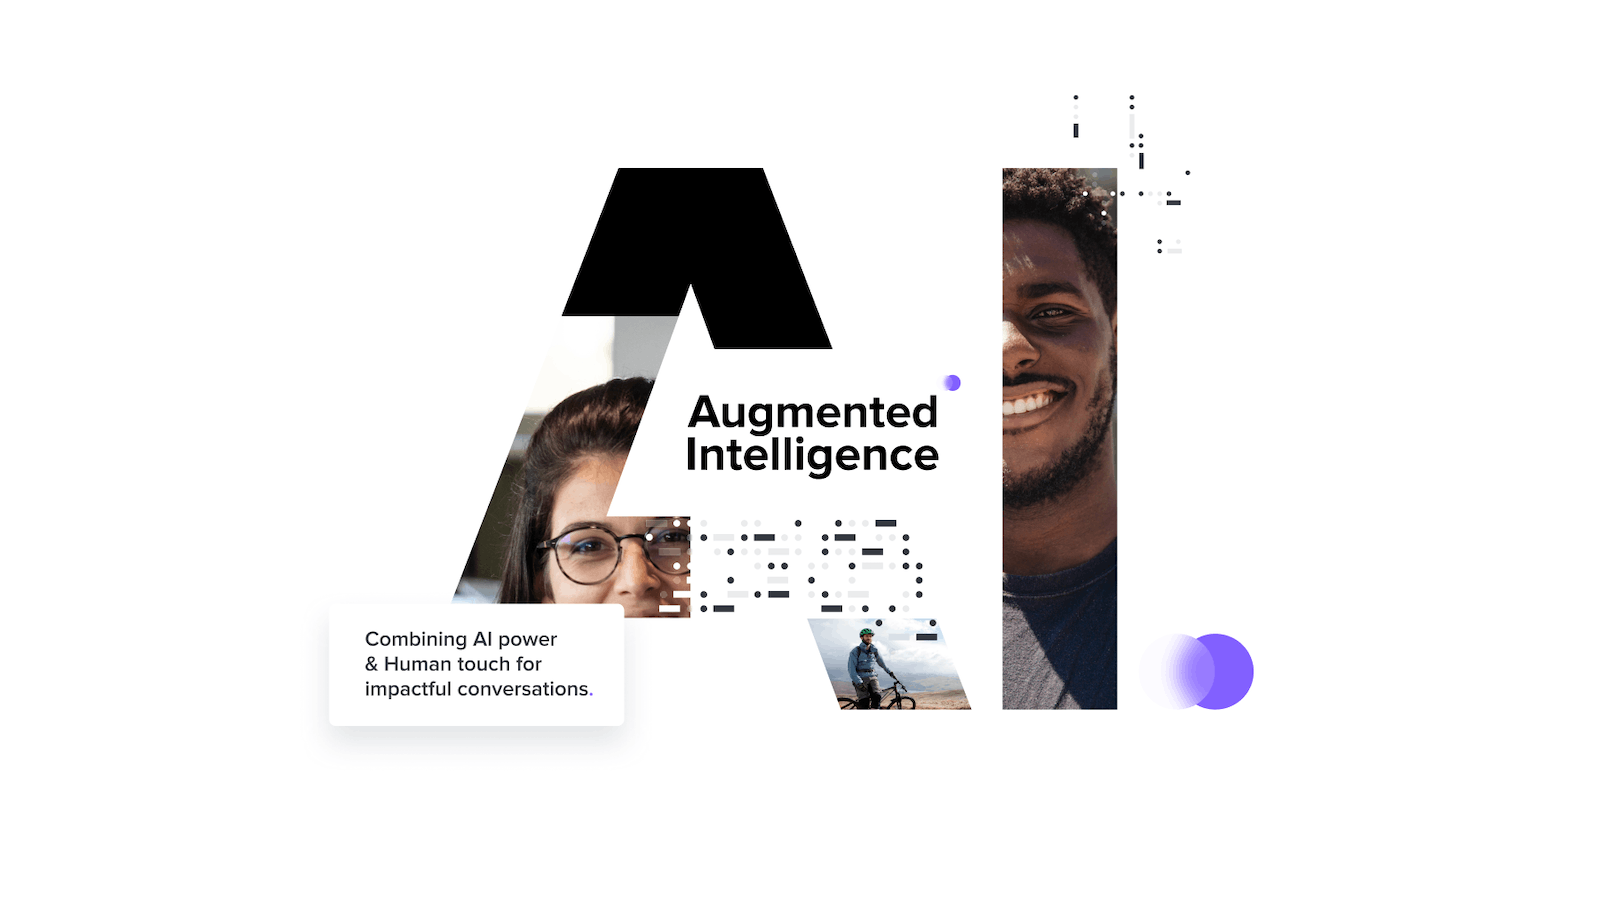  Featured image: iAdvize Releases Augmented Intelligence: A Unique Collaborative Solution Between Humans & AI for Impactful Conversations - Read full post: iAdvize Releases Augmented Intelligence: A Unique Collaborative Solution Between Humans & AI for Impactful Conversations